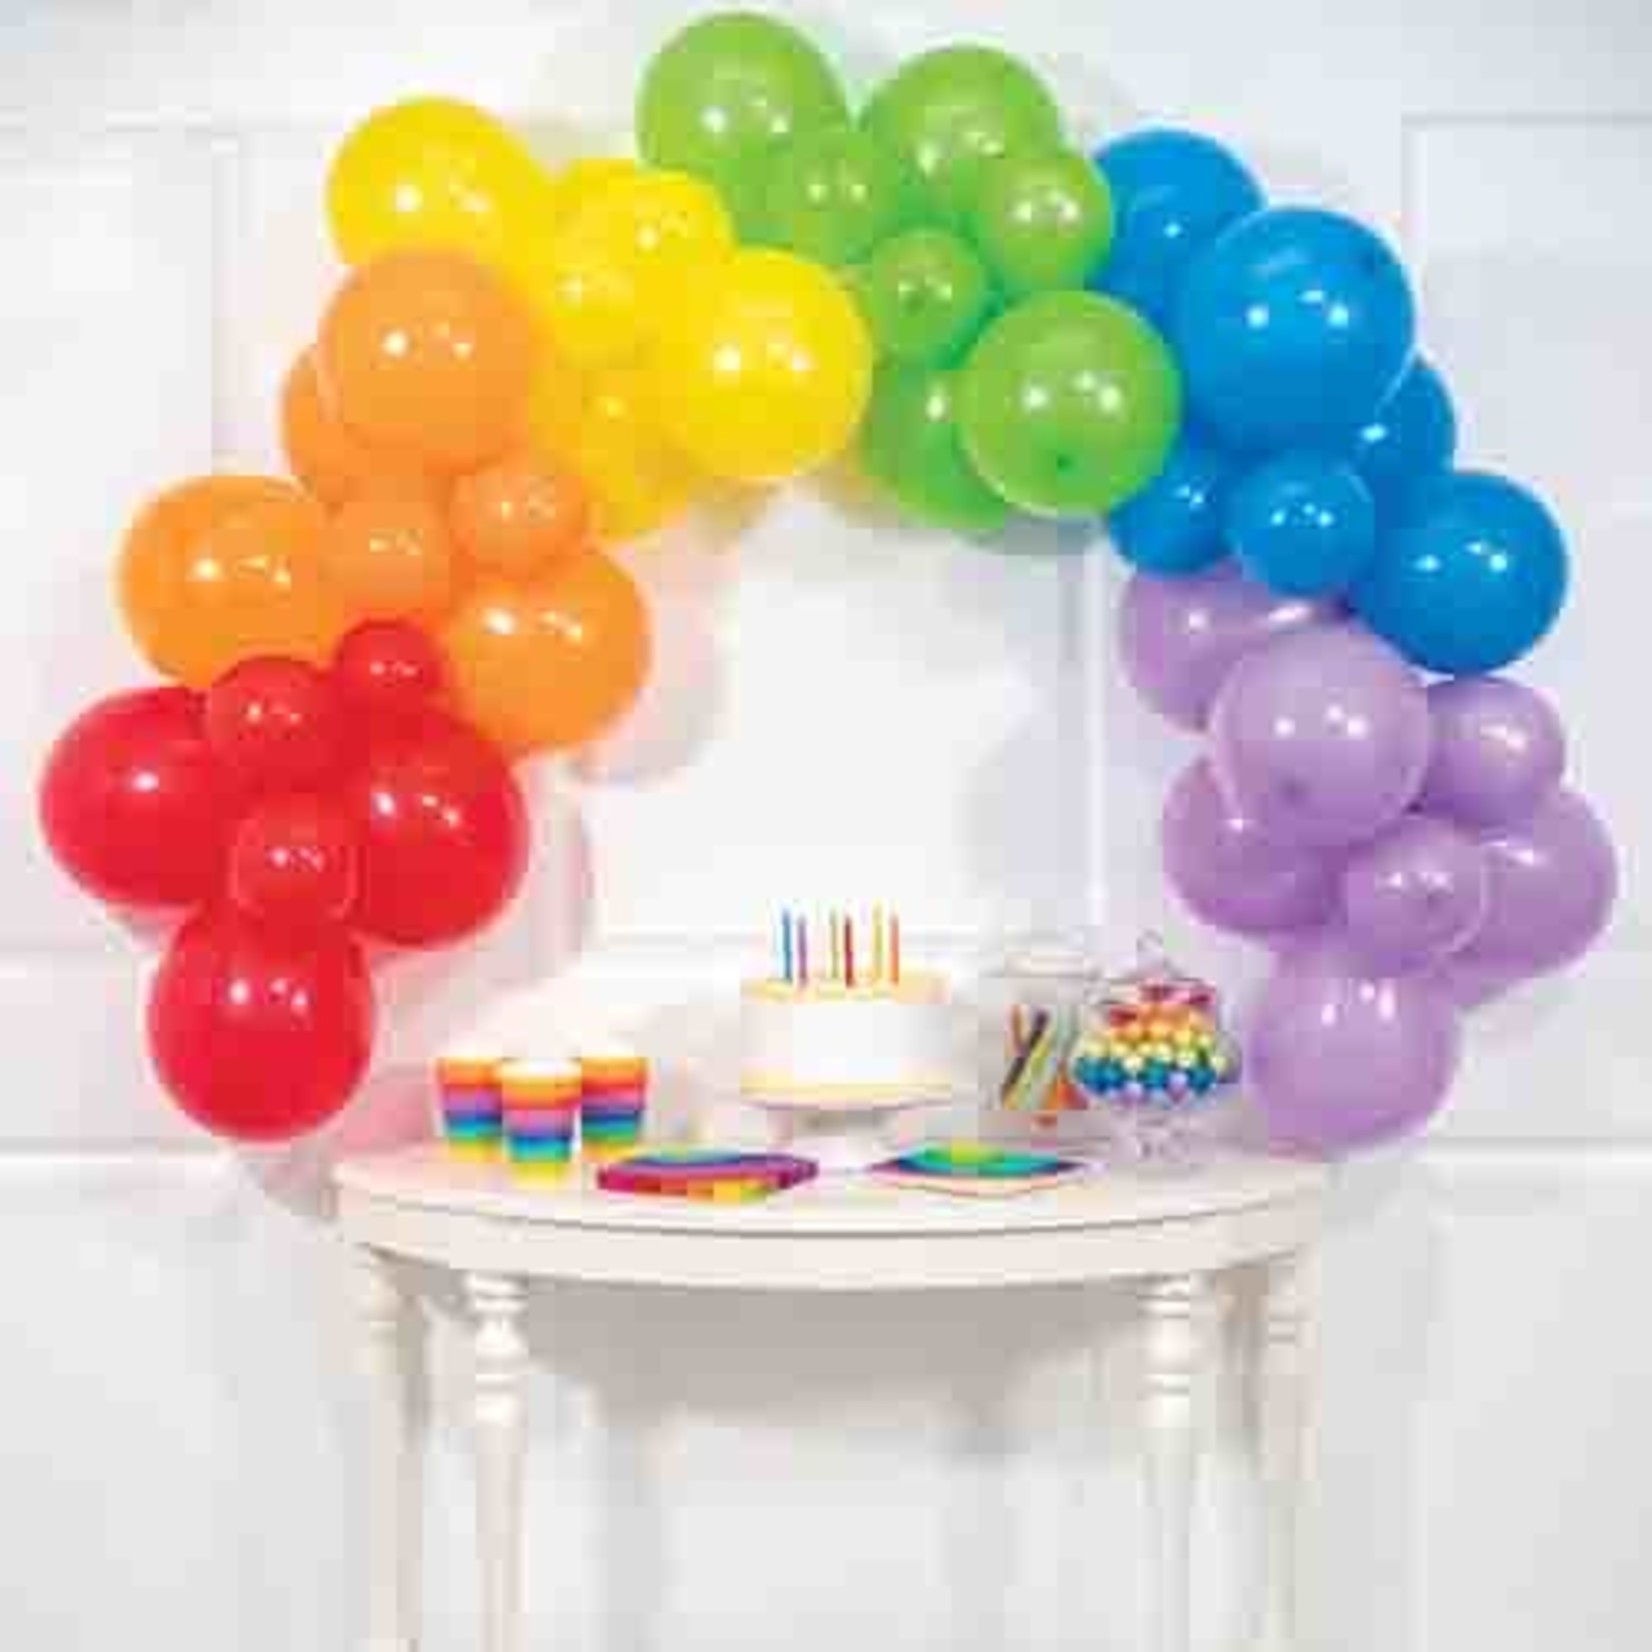 Creative Converting Rainbow Balloon Decorating Garland Kit - 6ft. (Balloons Included)